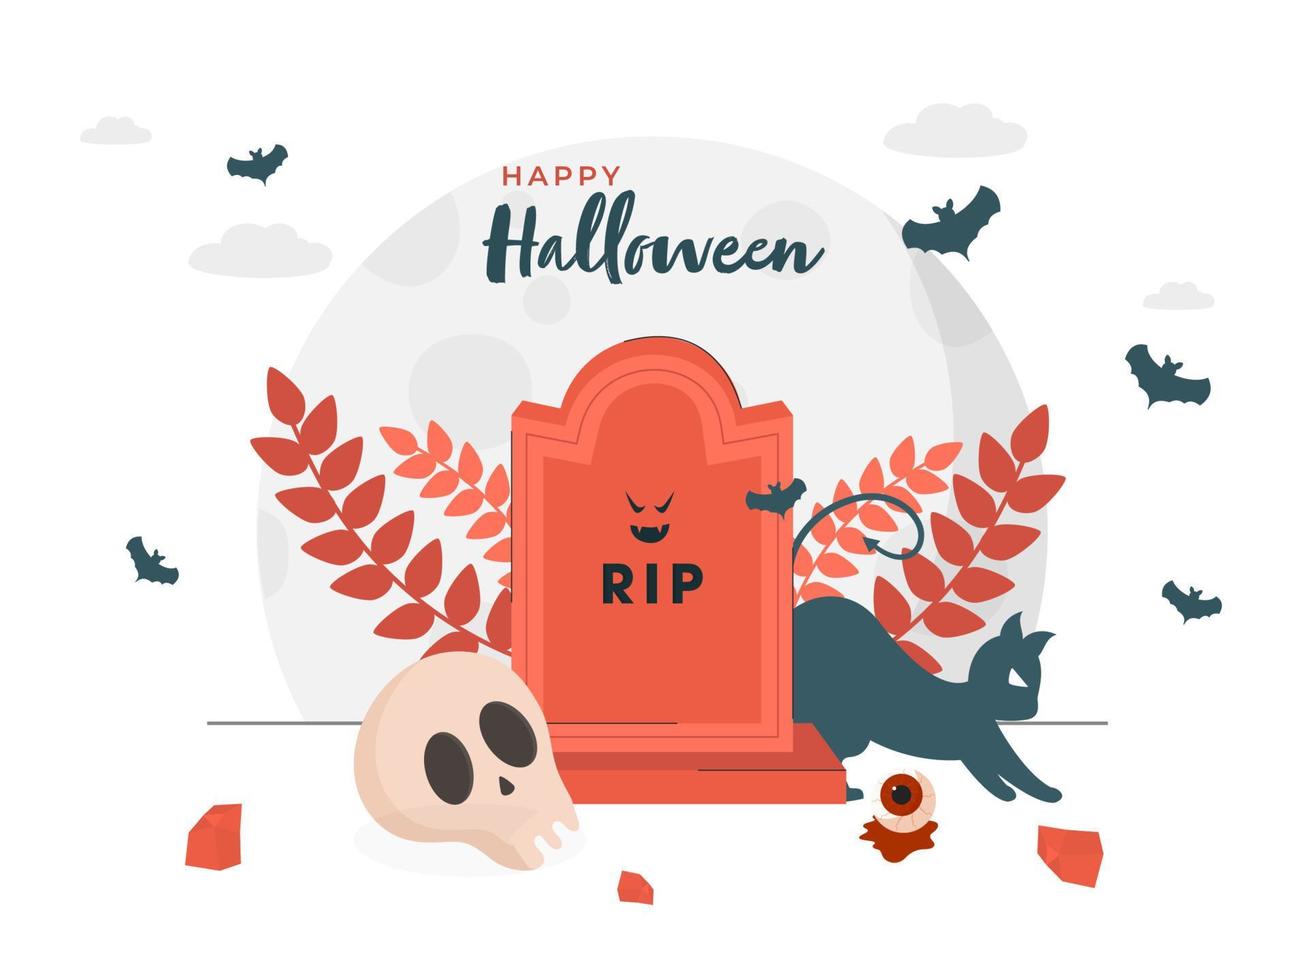 Illustration Of RIP Stone with Scary Cat, Skull, Leaves and Bats Flying on White Background for Happy Halloween Celebration. vector